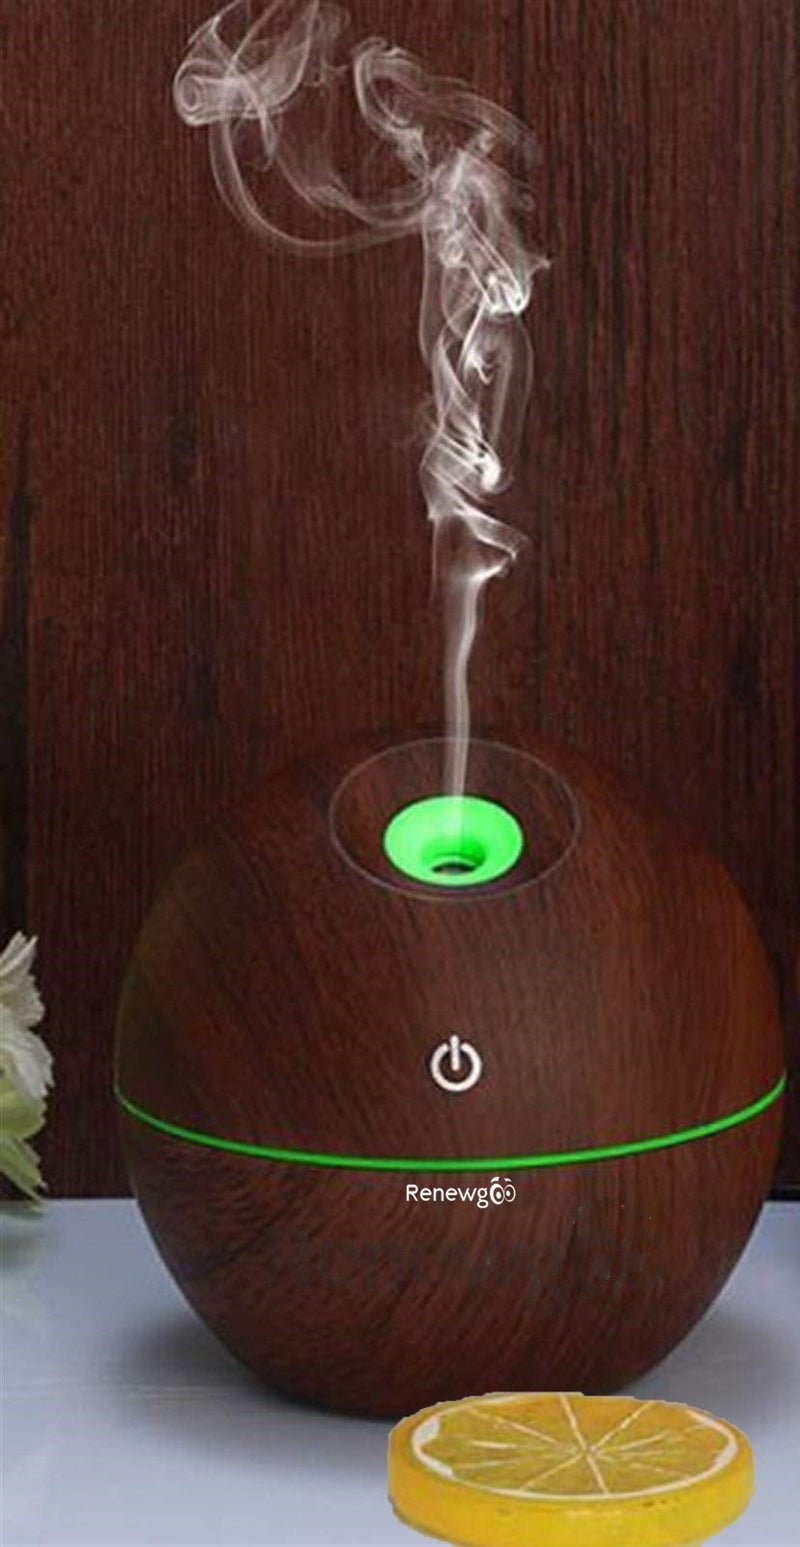 A few drops of oil poured into a diffuser can fill a room with the lush and relaxing scent